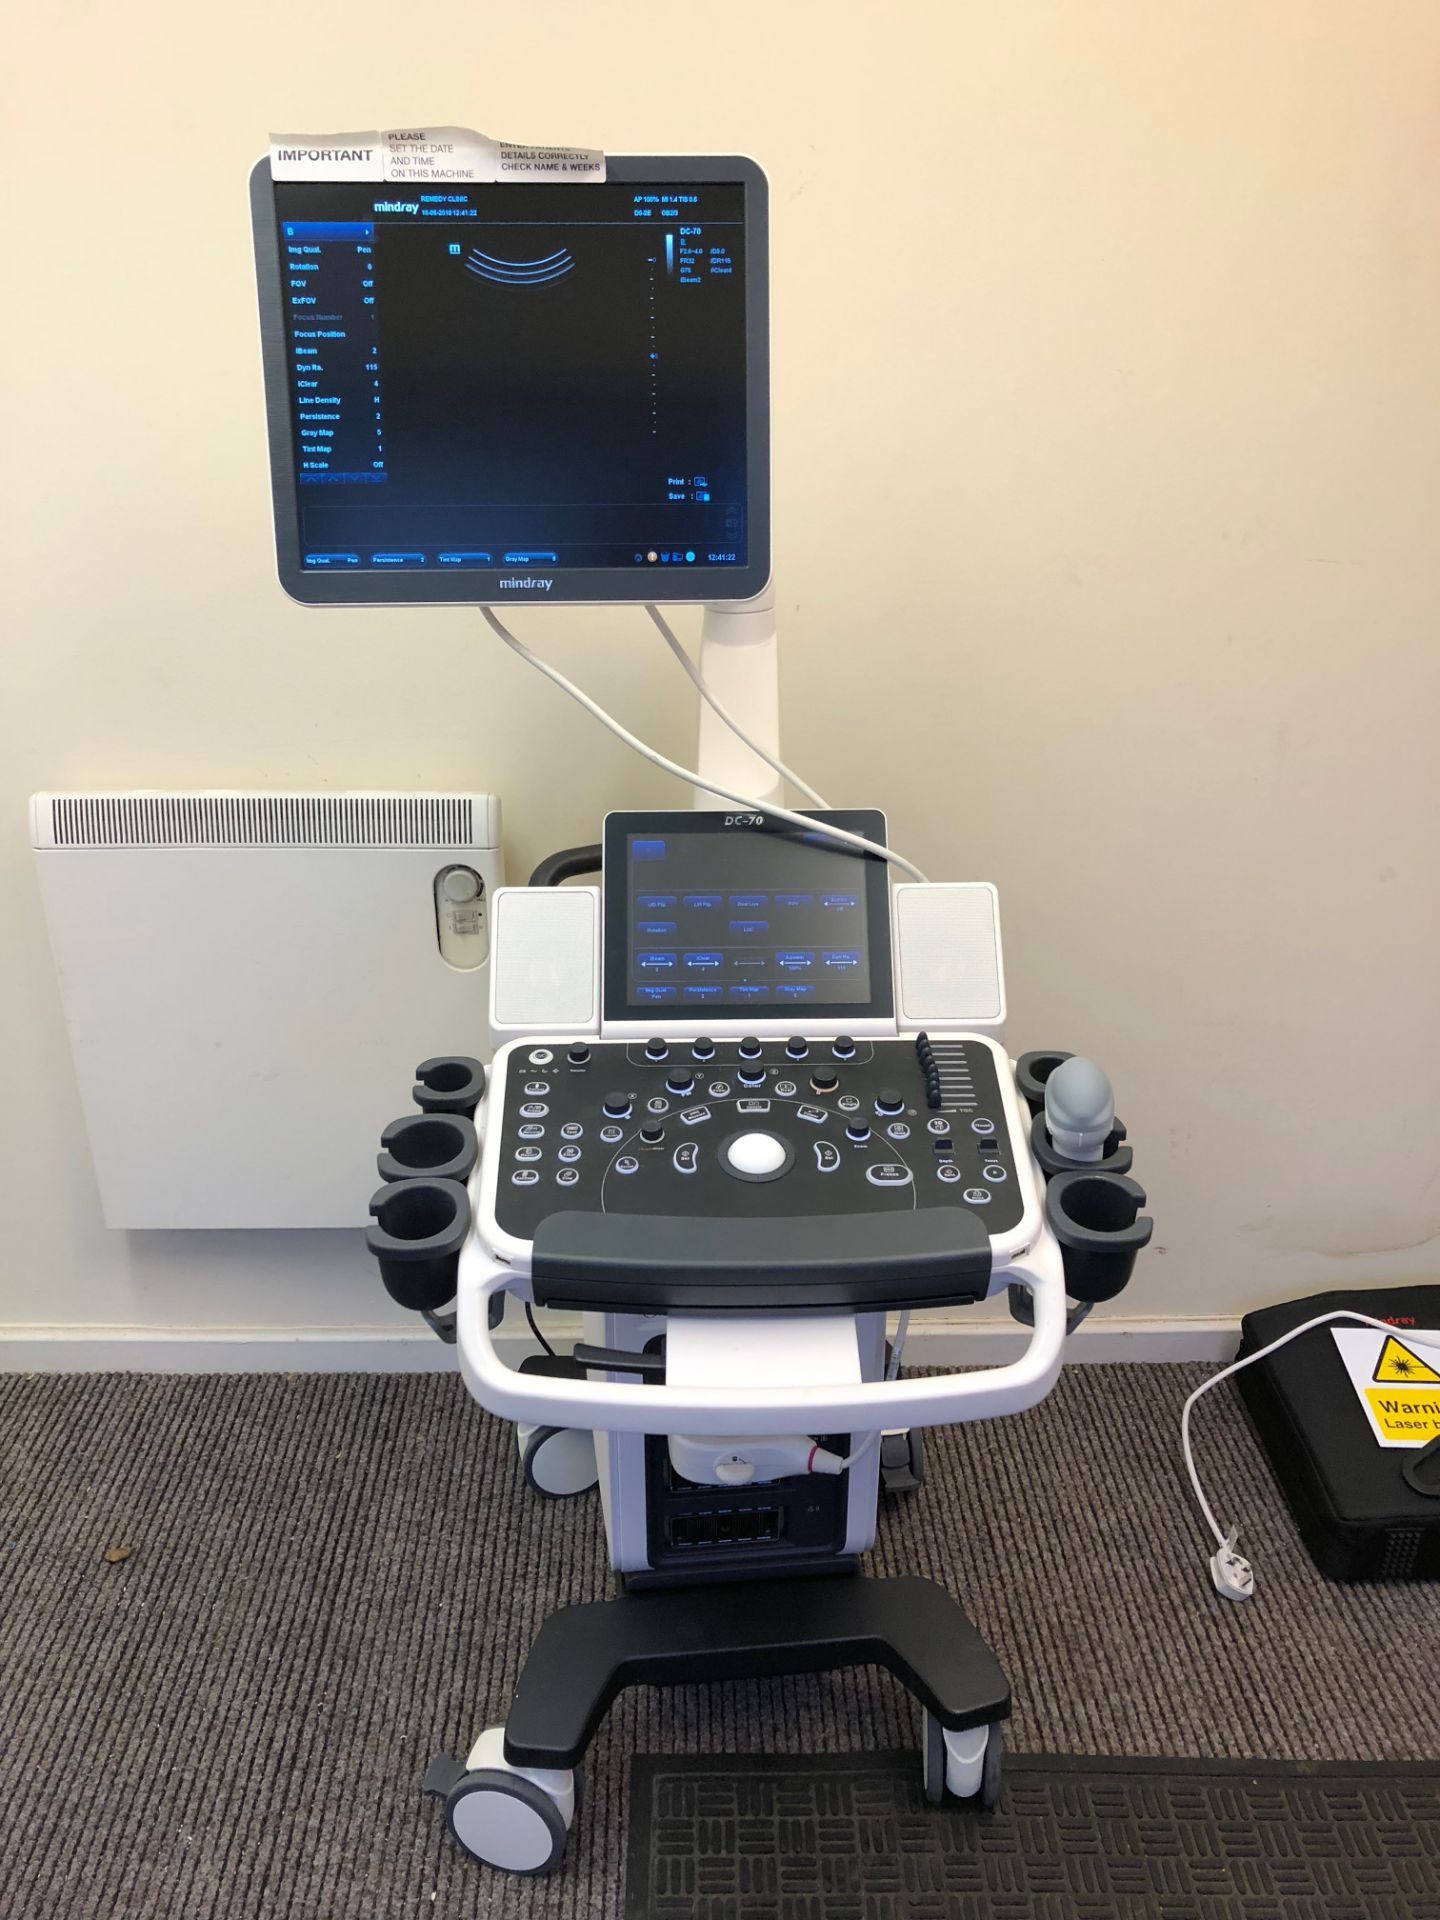 Mindray, DC-70 Ultrasound Complete with 4 Transducers - 4D system